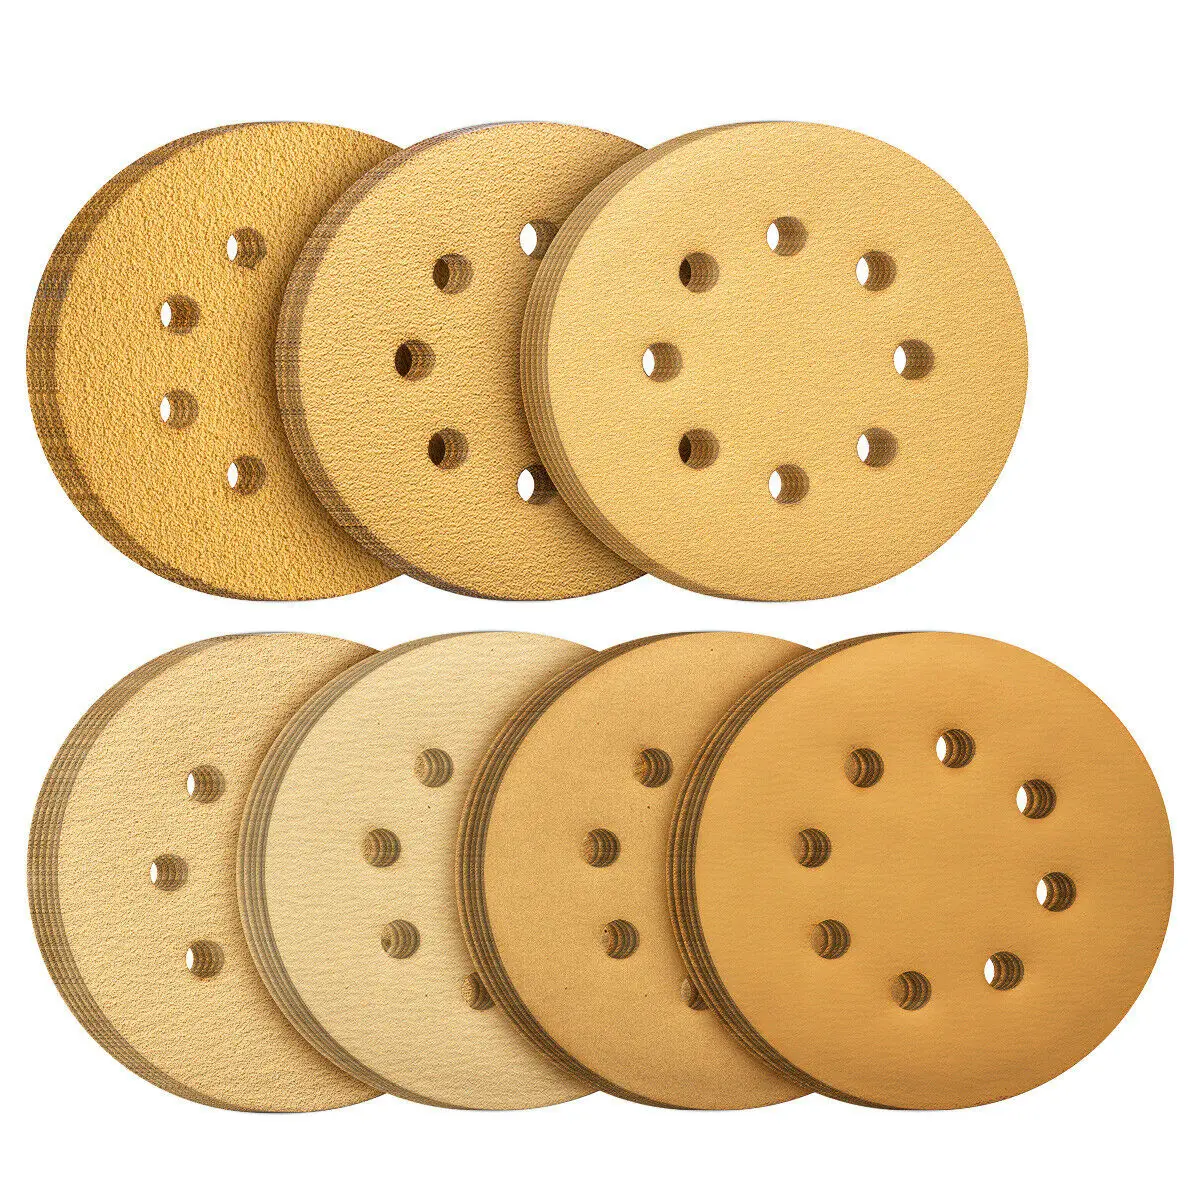 105PCS 5 Inch Gold Sanding Discs Hook and Loop 8 Holes Assorted Grits Sandpaper